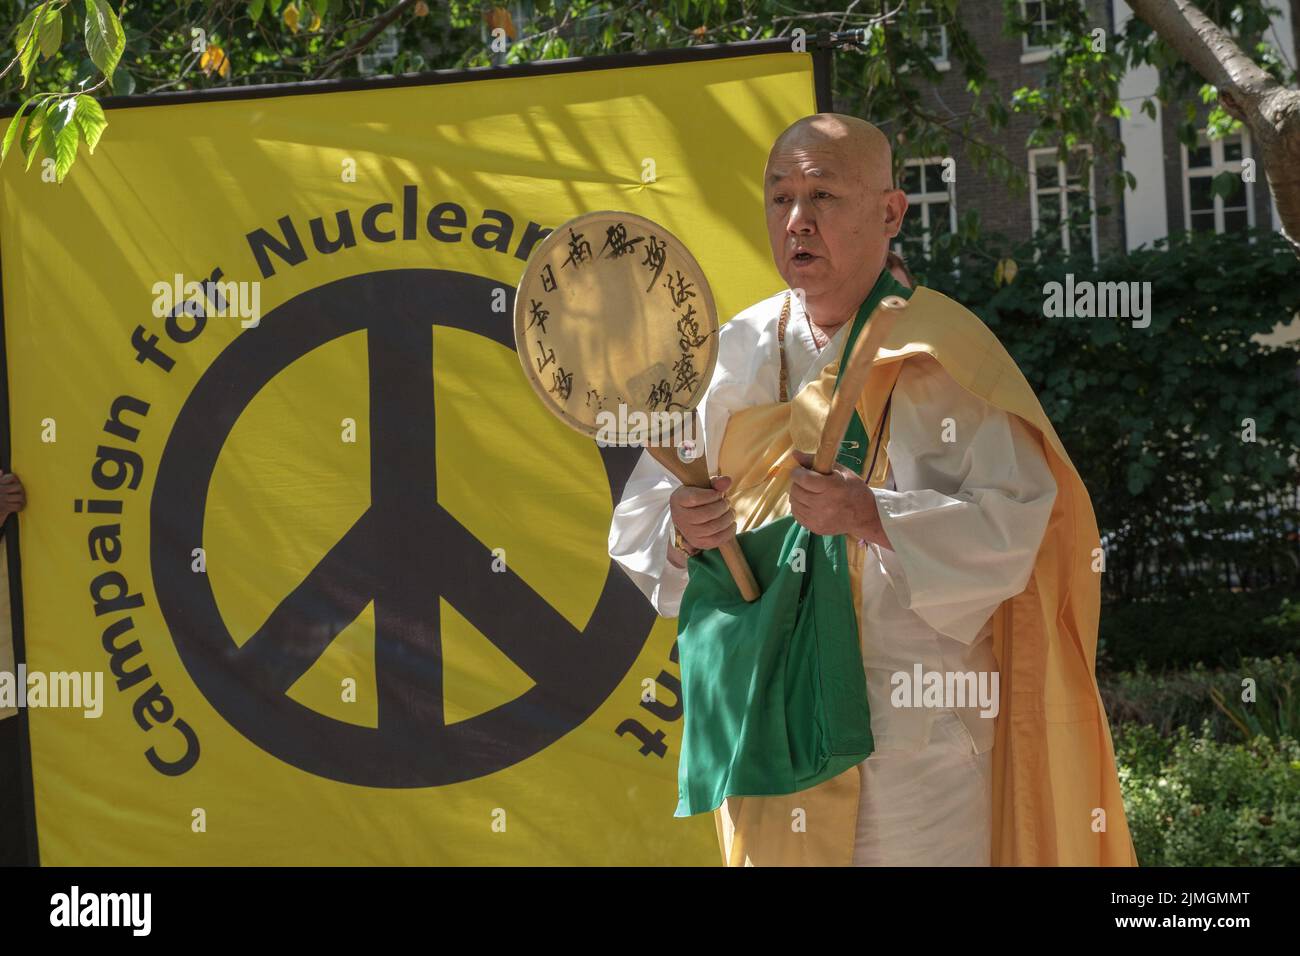 London, UK. 6 Aug 2022.   Rev Nagase from the Battersea Peace Pagoda prays in the London CND ceremony at the Hiroshima Cherry tree in Tavistock Square 77 years after atomic bombs were exploded over Hiroshima and Nagaski, in memory of the over 350,000 people in the cities killed immediately or in the next few months. The event also remembered survivors still suffering and called on the UK government to end its nuclear weapon programme, end US storage of nuclear weapons in the UK and sign the UN treaty prohibiting nuclear weapons. Peter Marshall/Alamy Live News. Stock Photo